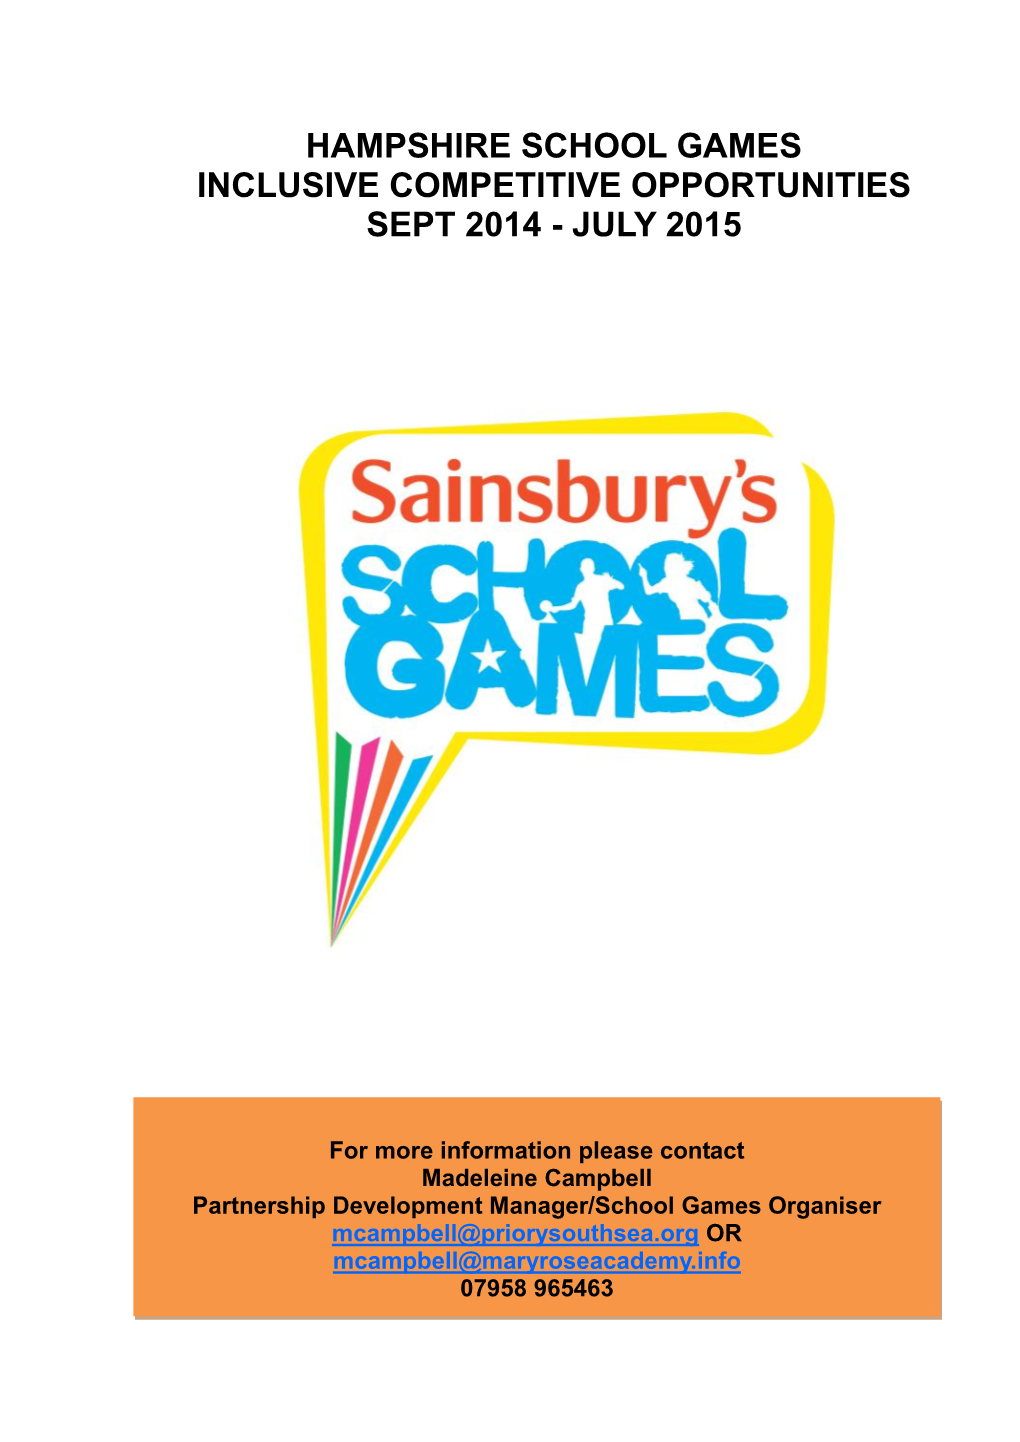 Hampshire School Games Inclusive Competitive Opportunities Sept 2014 - July 2015